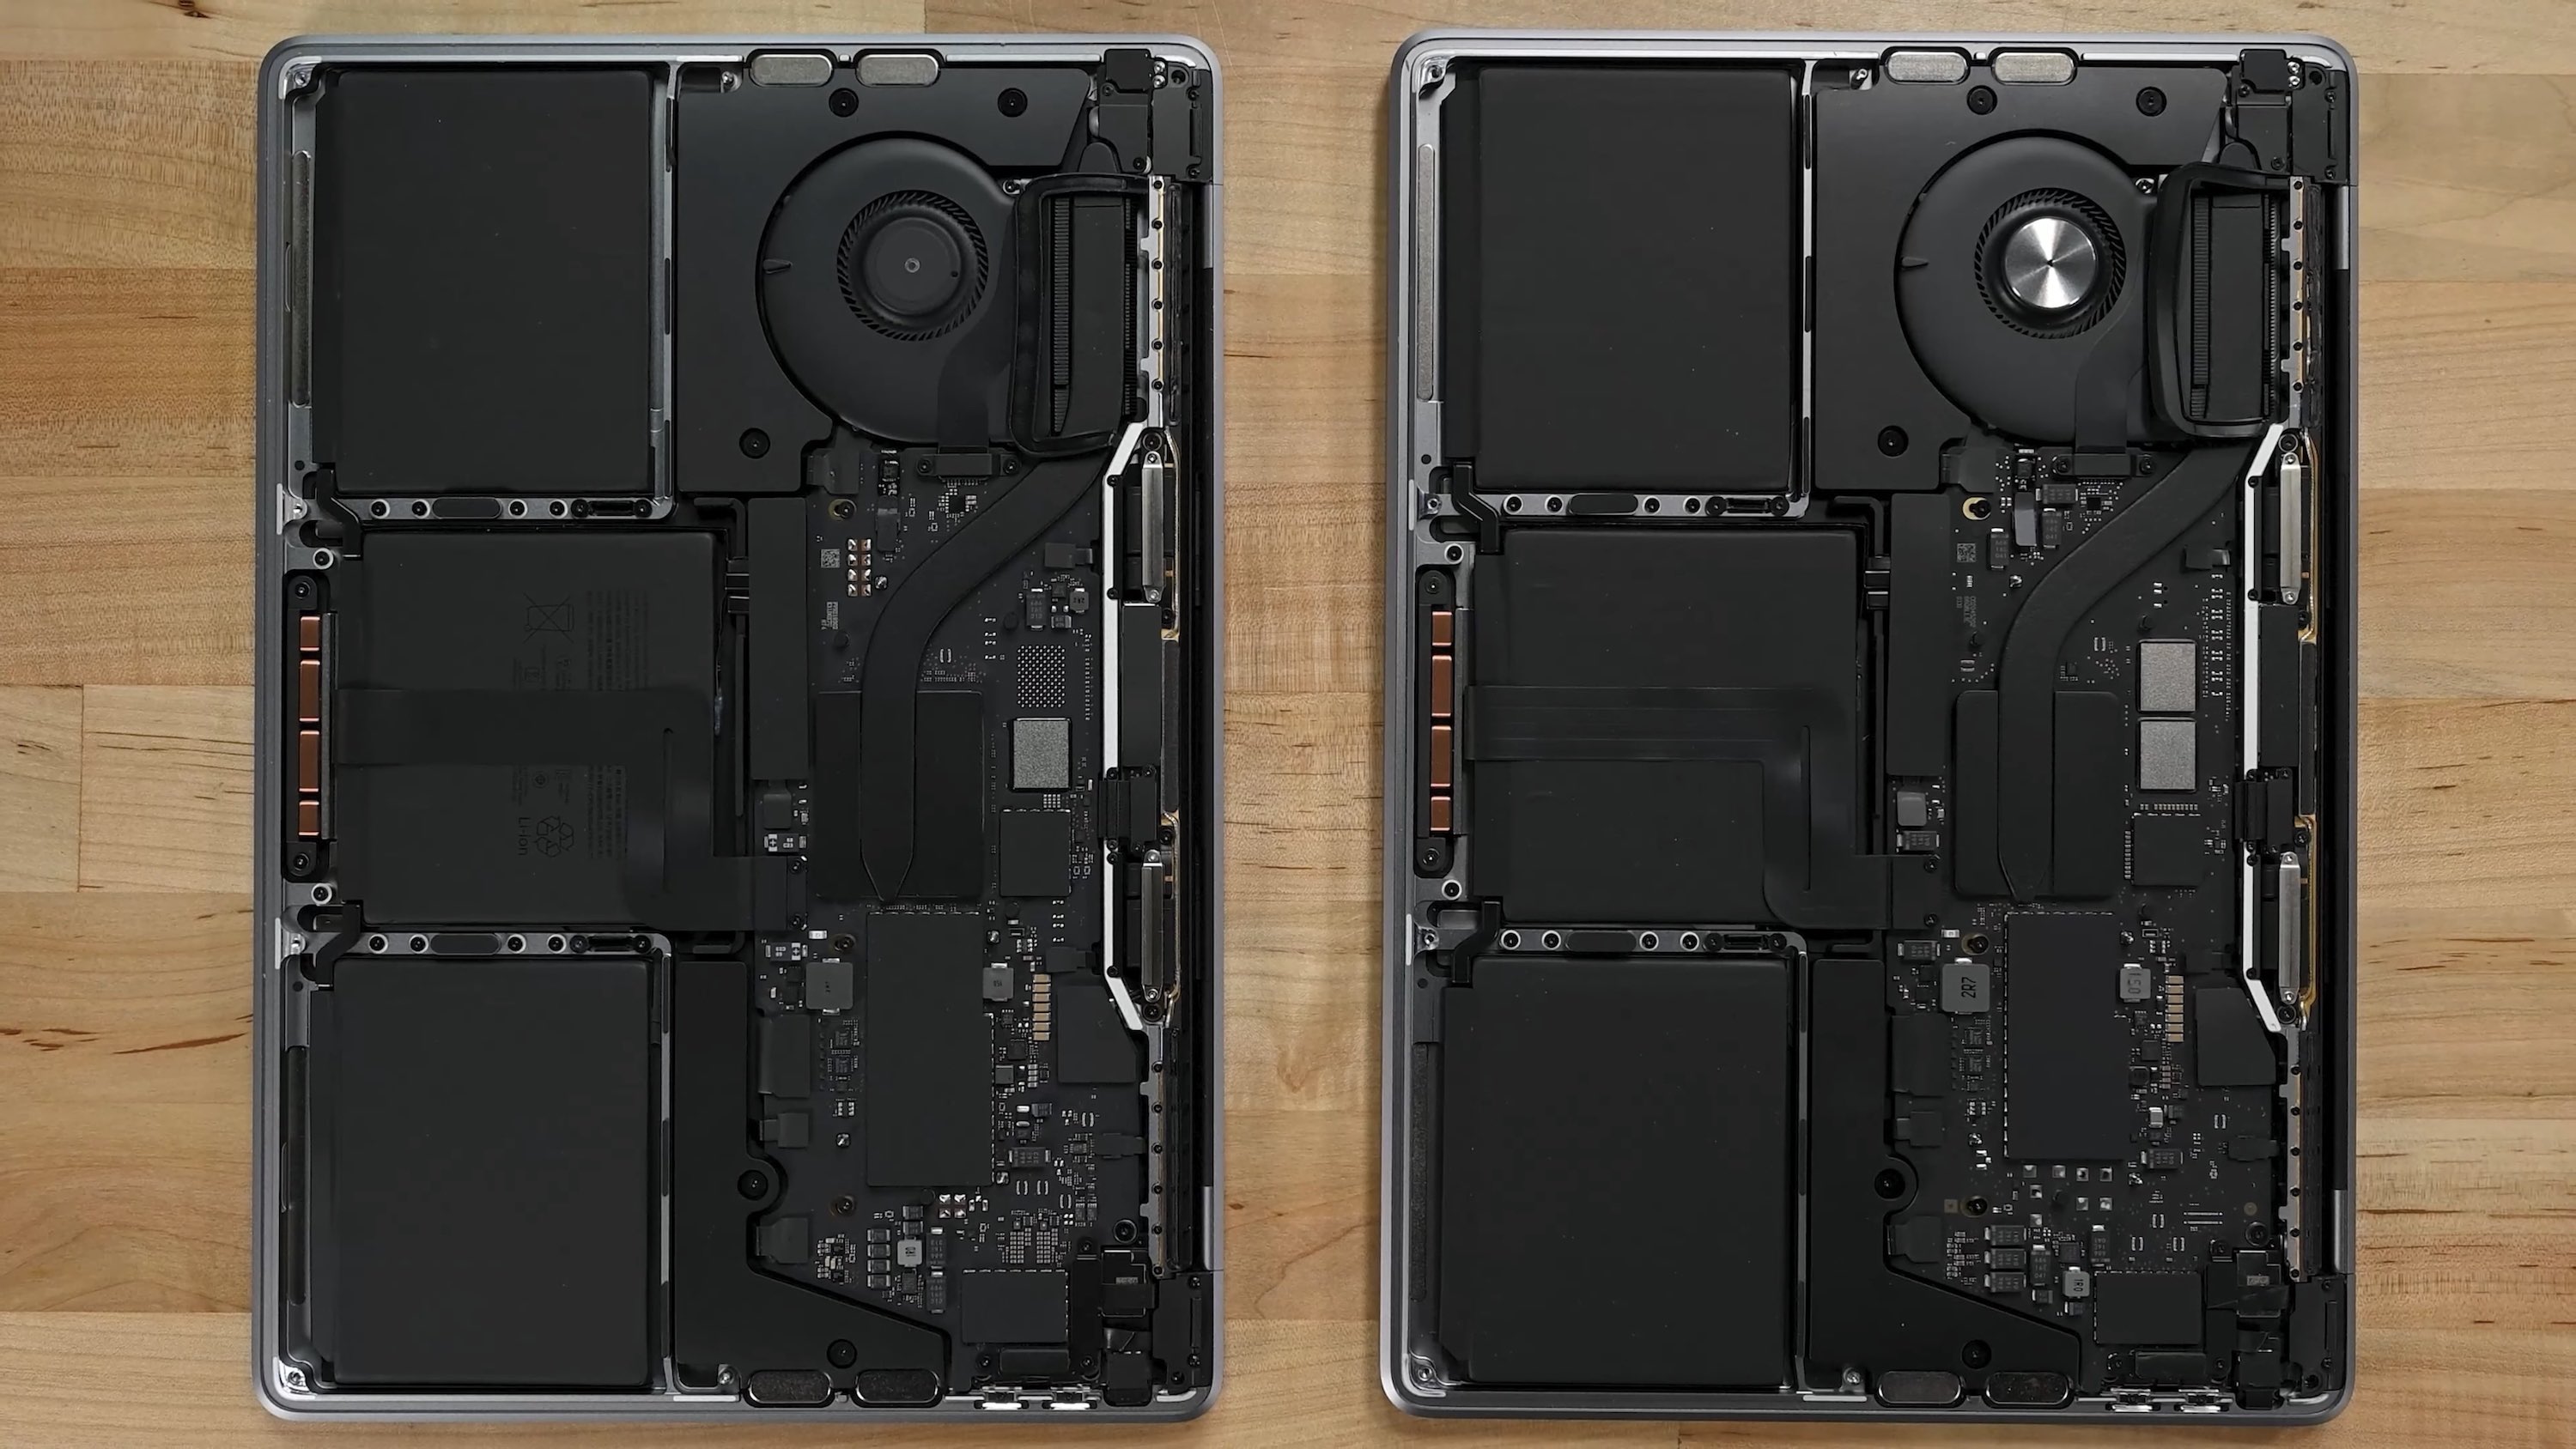 iFixit teardown shows M2 MacBook Pro is just a recycled laptop with a new chip inside